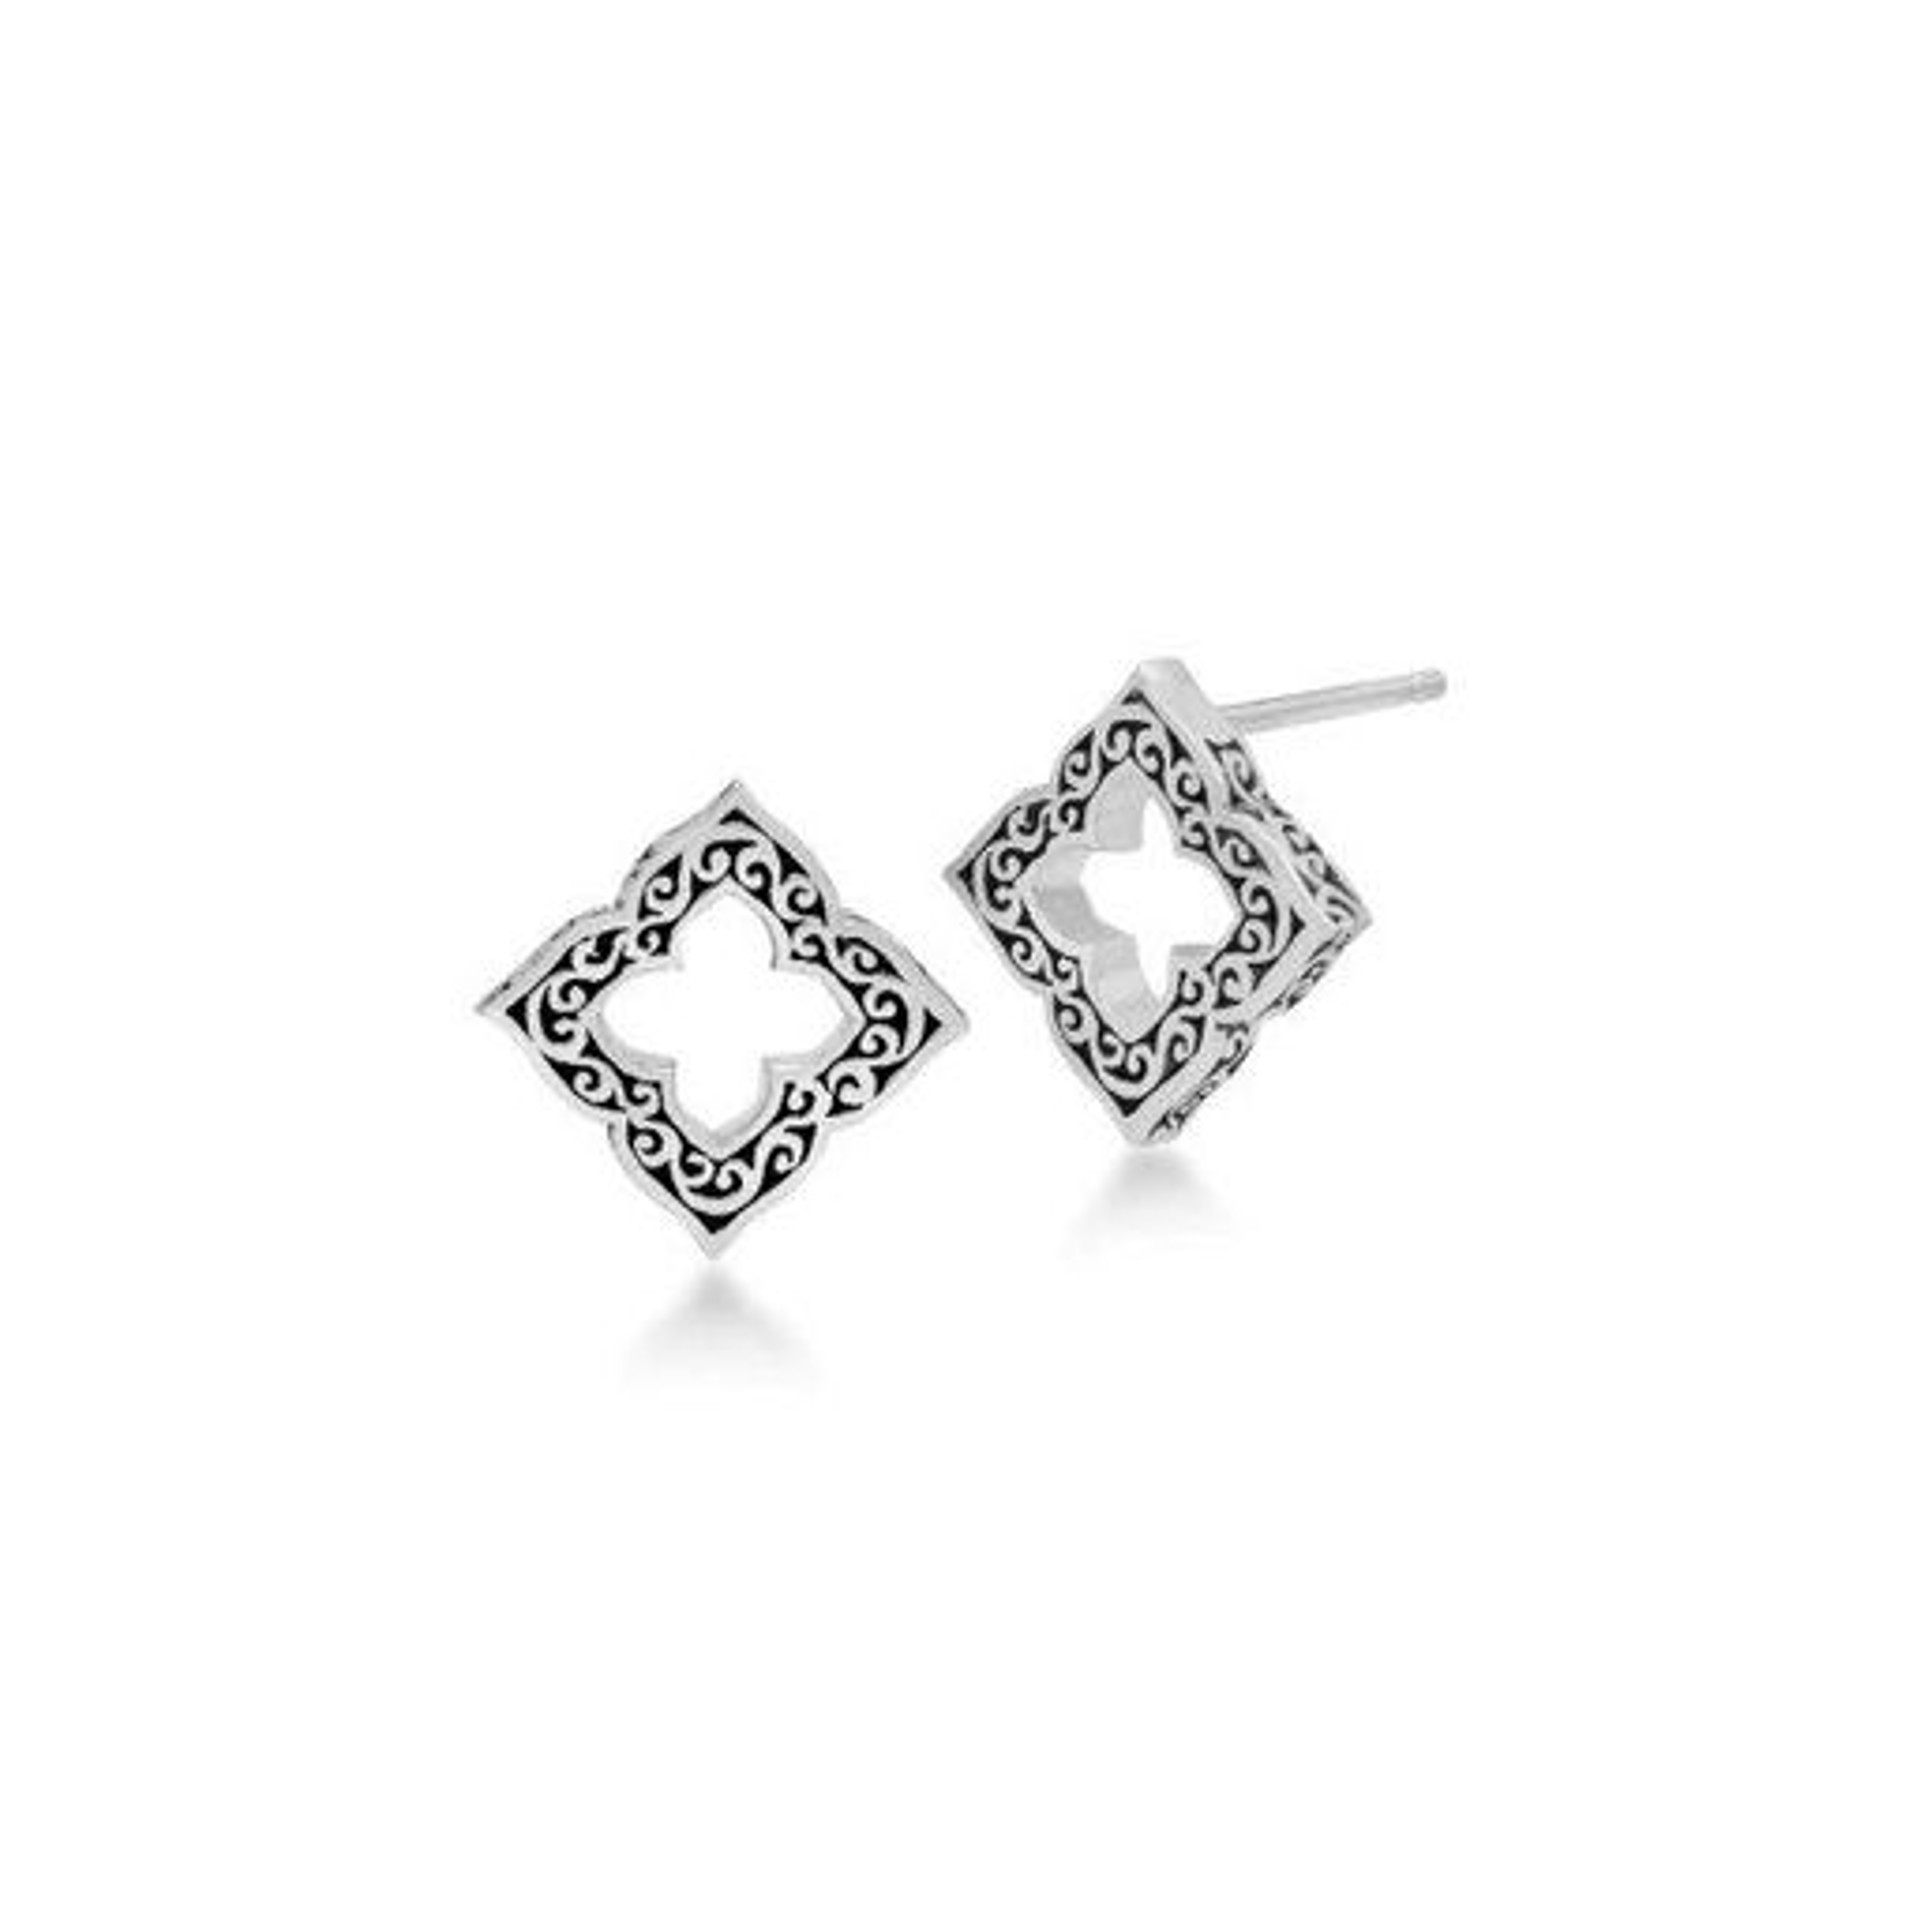 6965 Sterling Silver Square Cutout Earrings by Lois Hill